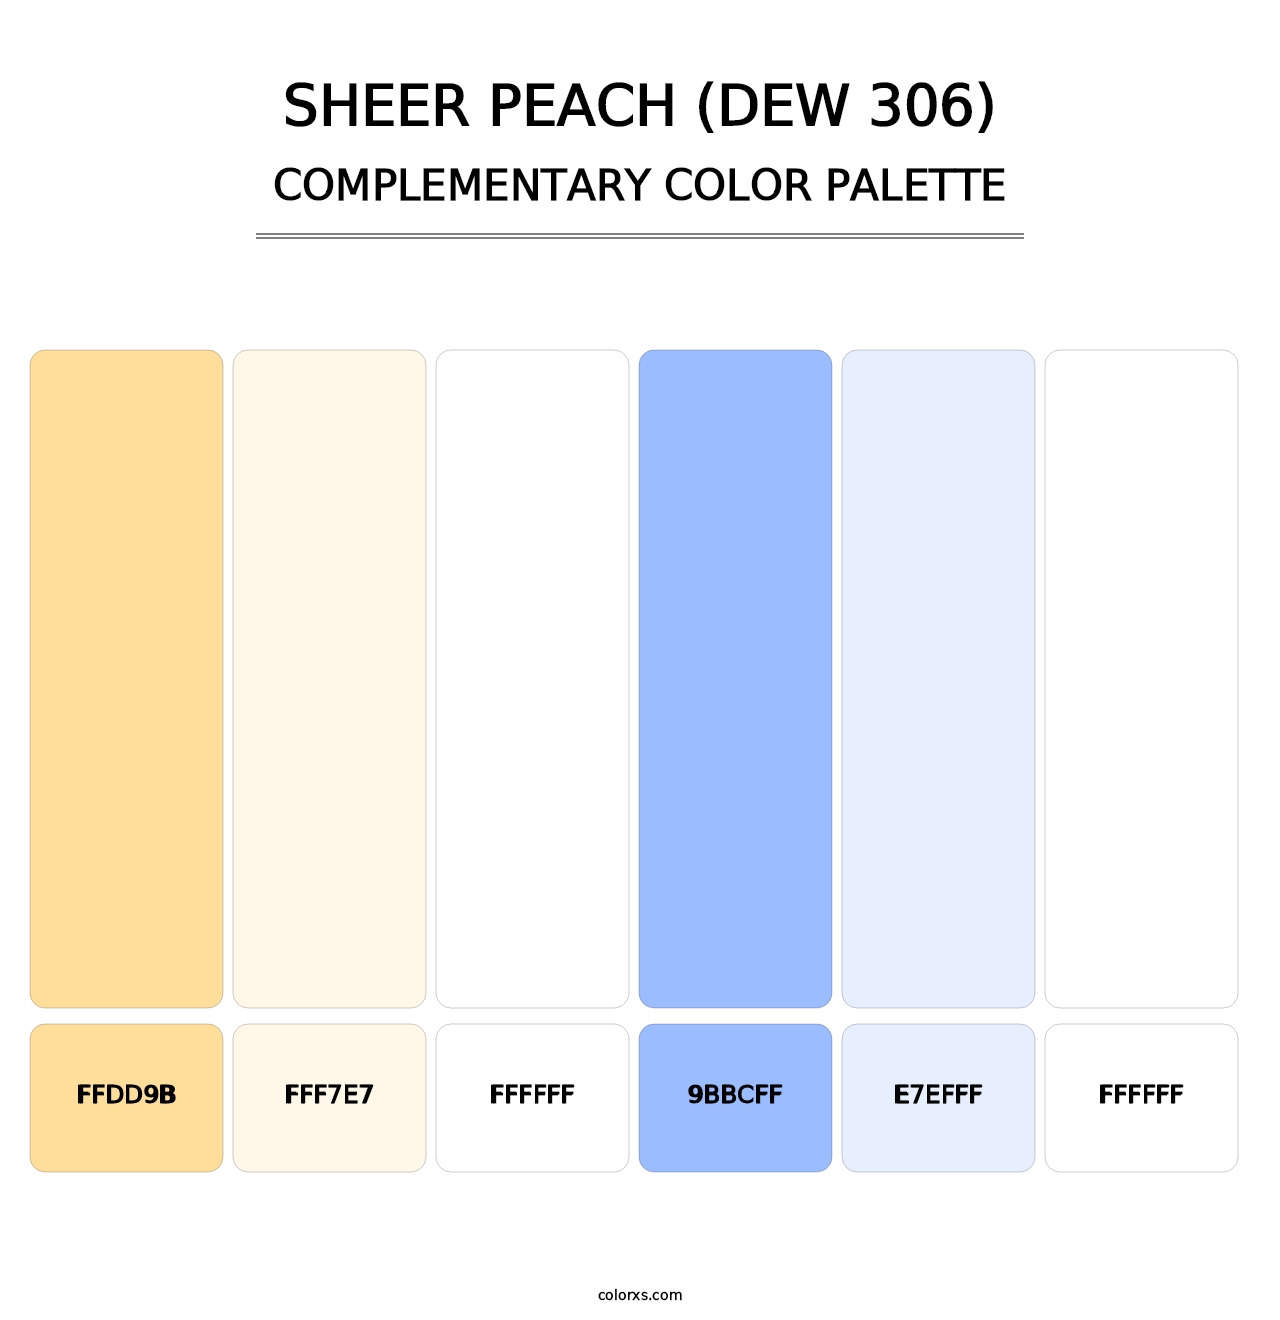 Sheer Peach (DEW 306) - Complementary Color Palette